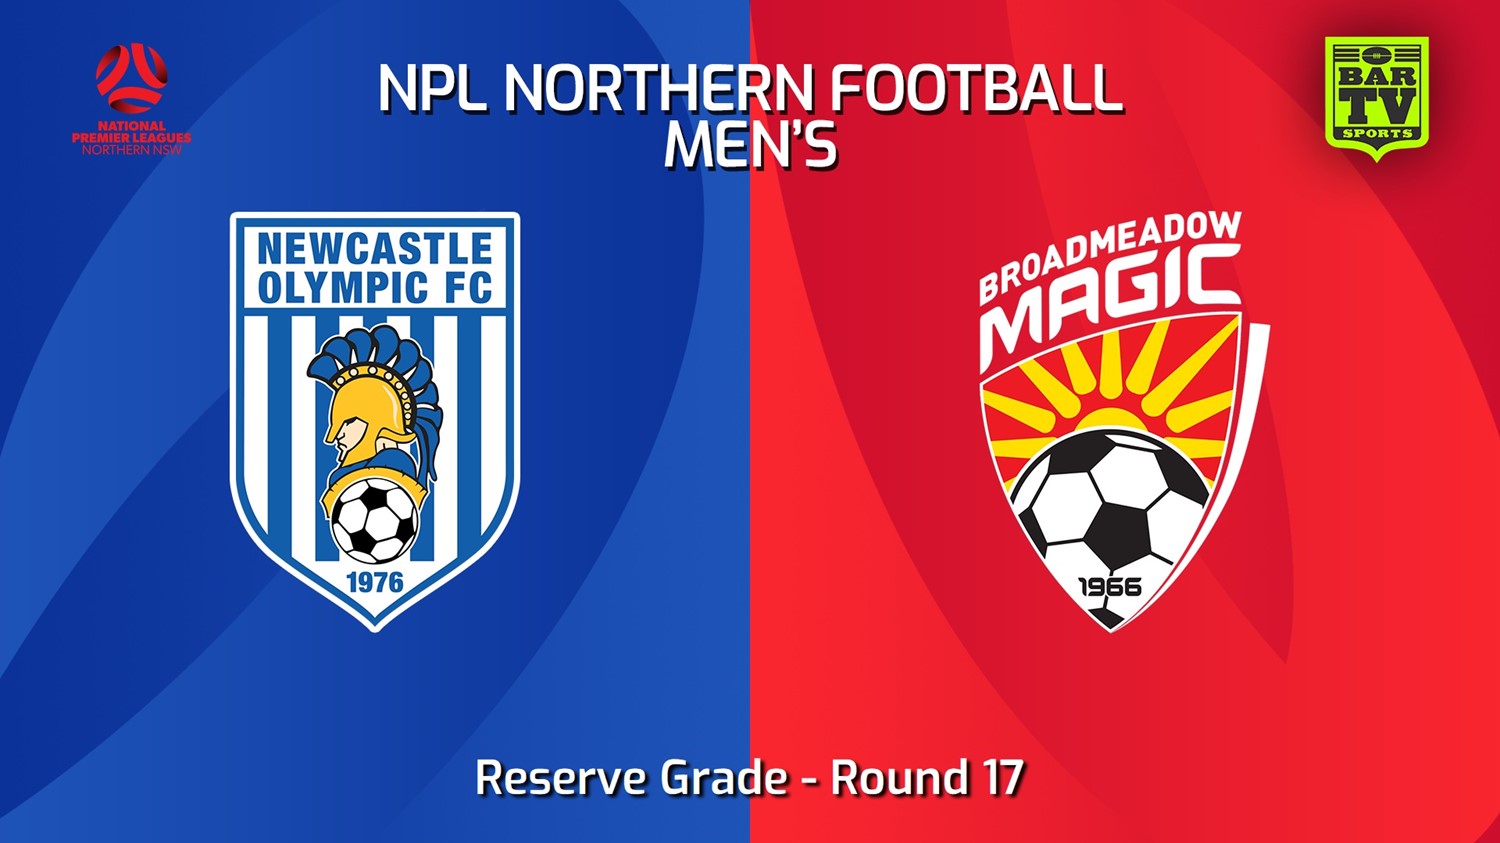 240630-video-NNSW NPLM Res Round 17 - Newcastle Olympic Res v Broadmeadow Magic Res Slate Image